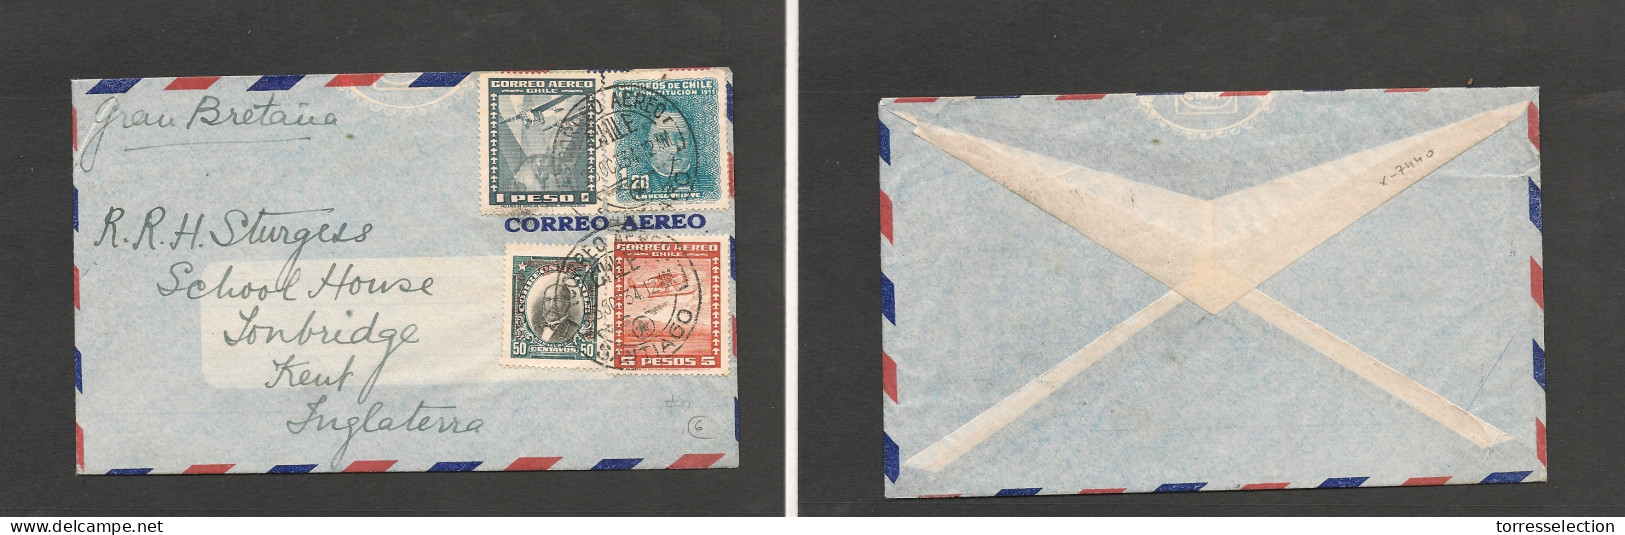 CHILE. Chile - Cover - 1934 23 Oct Stgo To UK Kent Air Mult Fkd Env Air France 27 Oct. Fine. Ex-Prof West UK Airmails Co - Chile